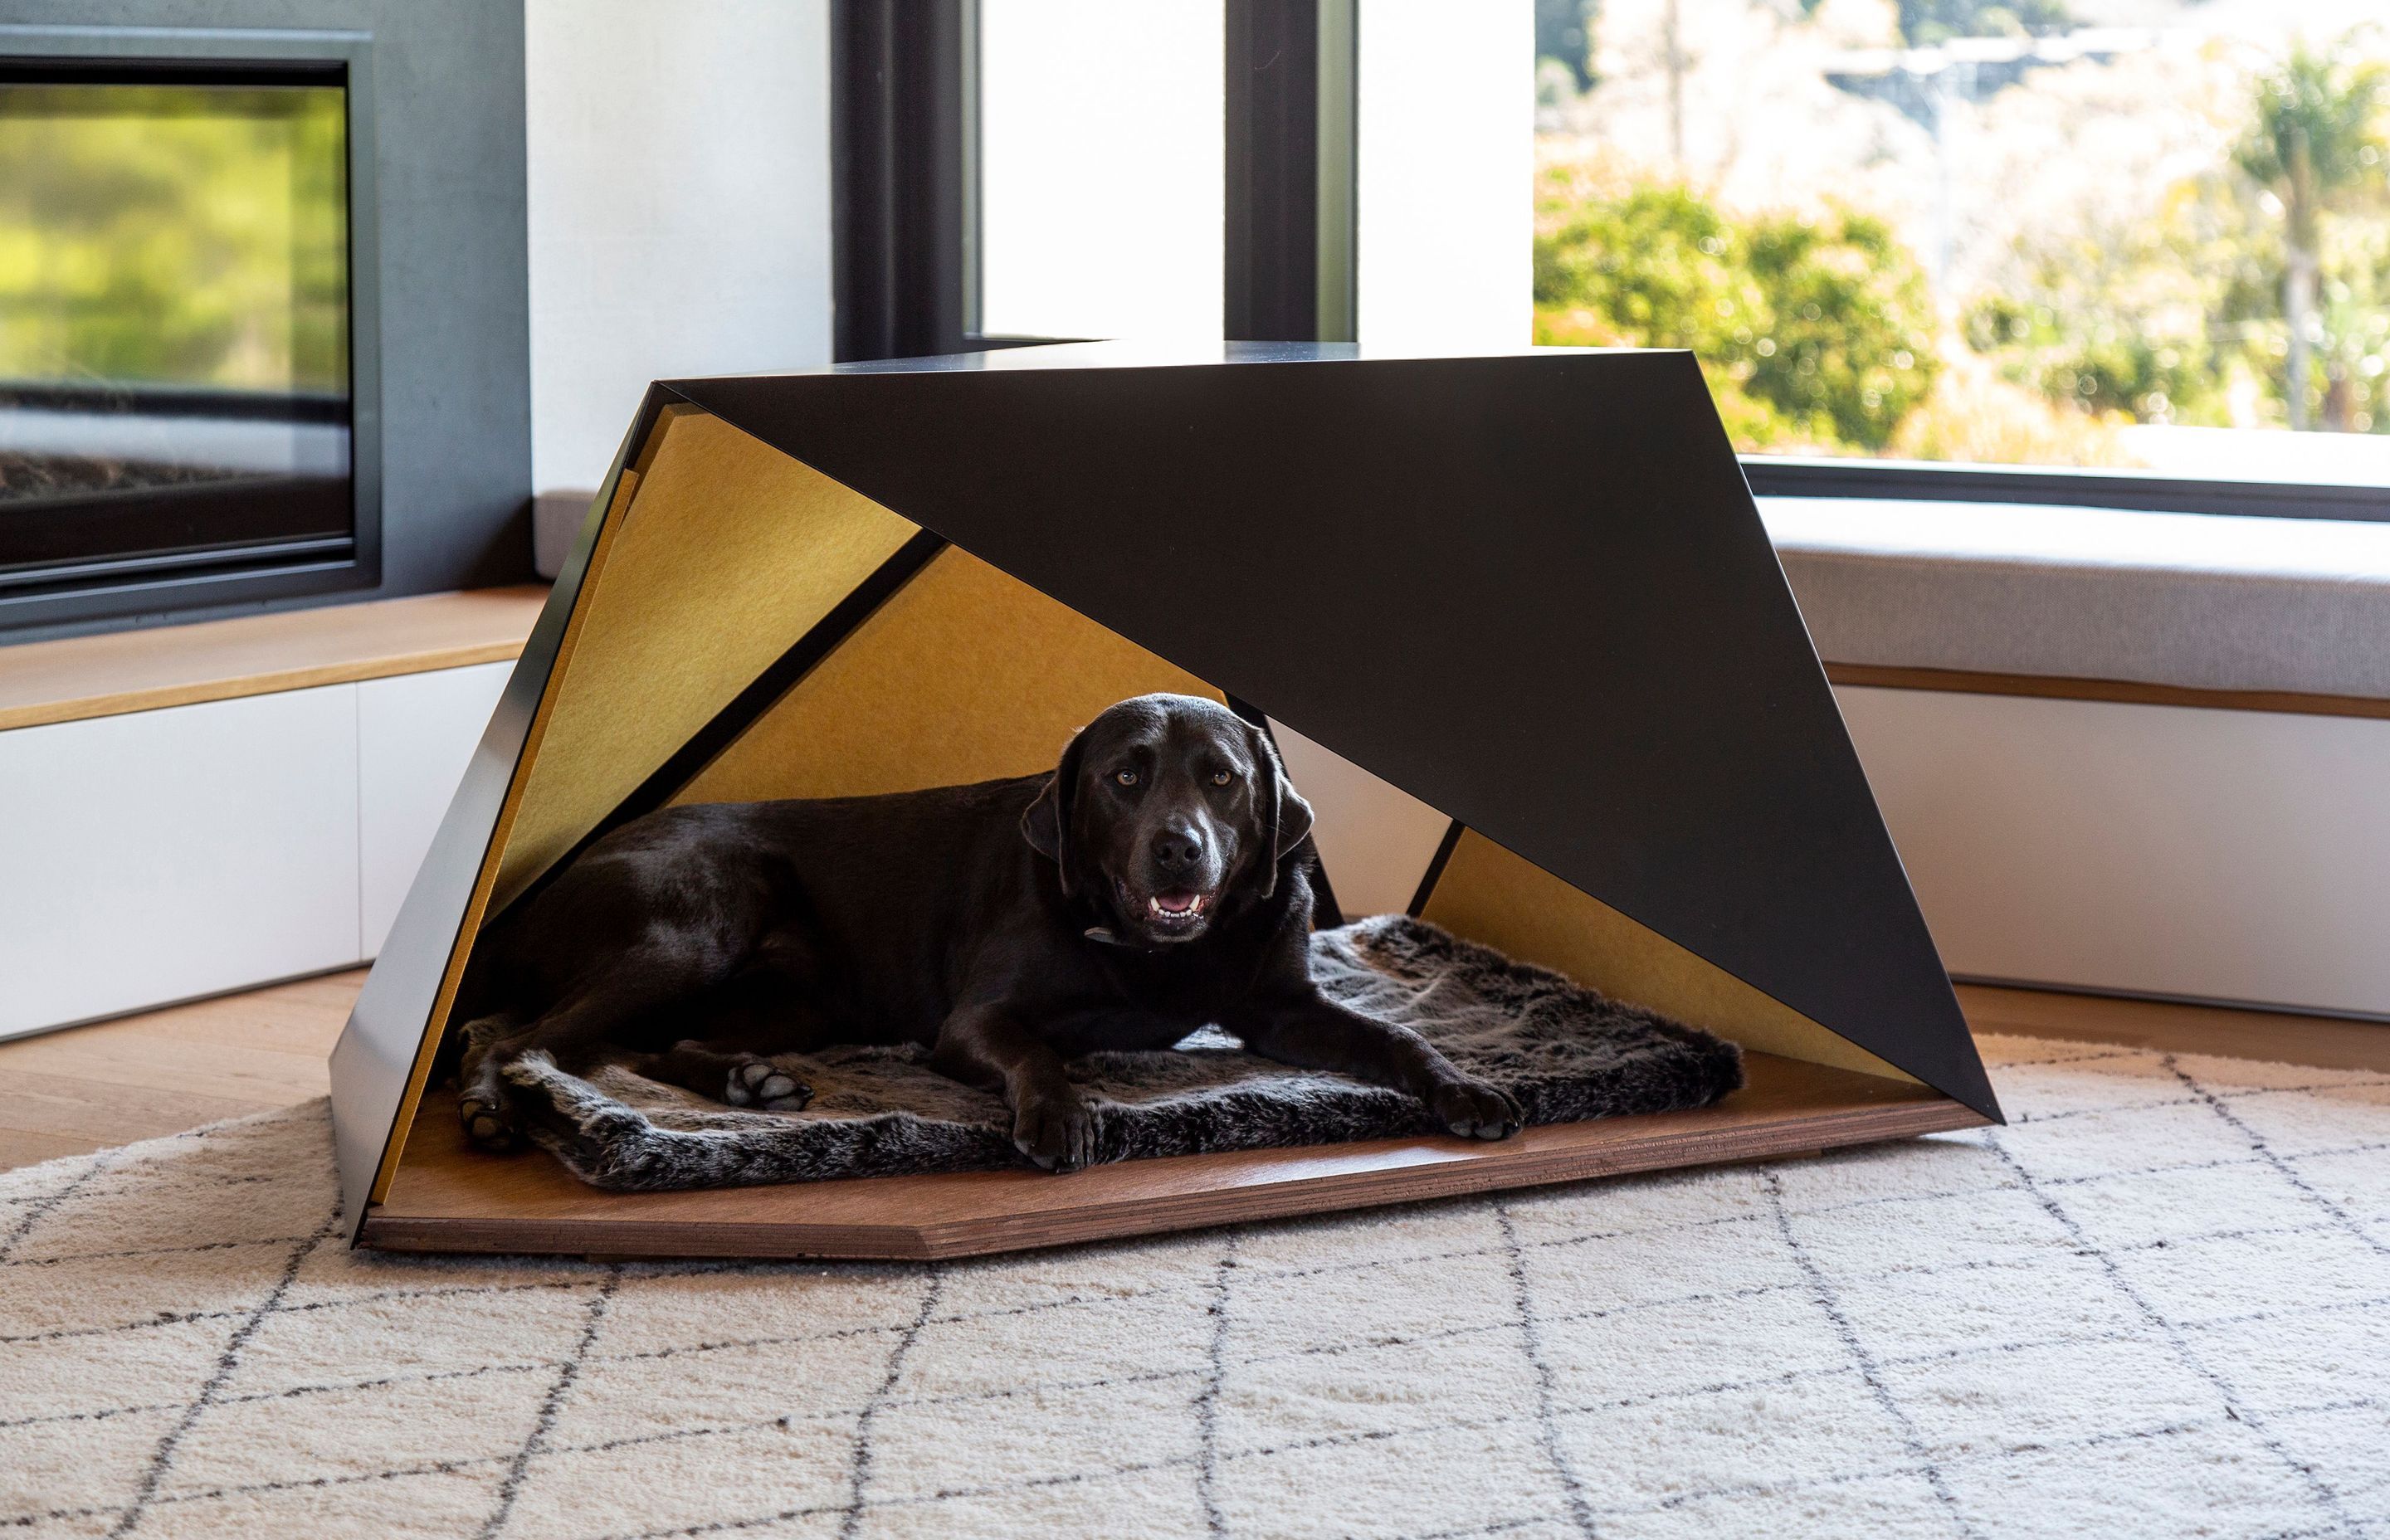 The Pup Tent